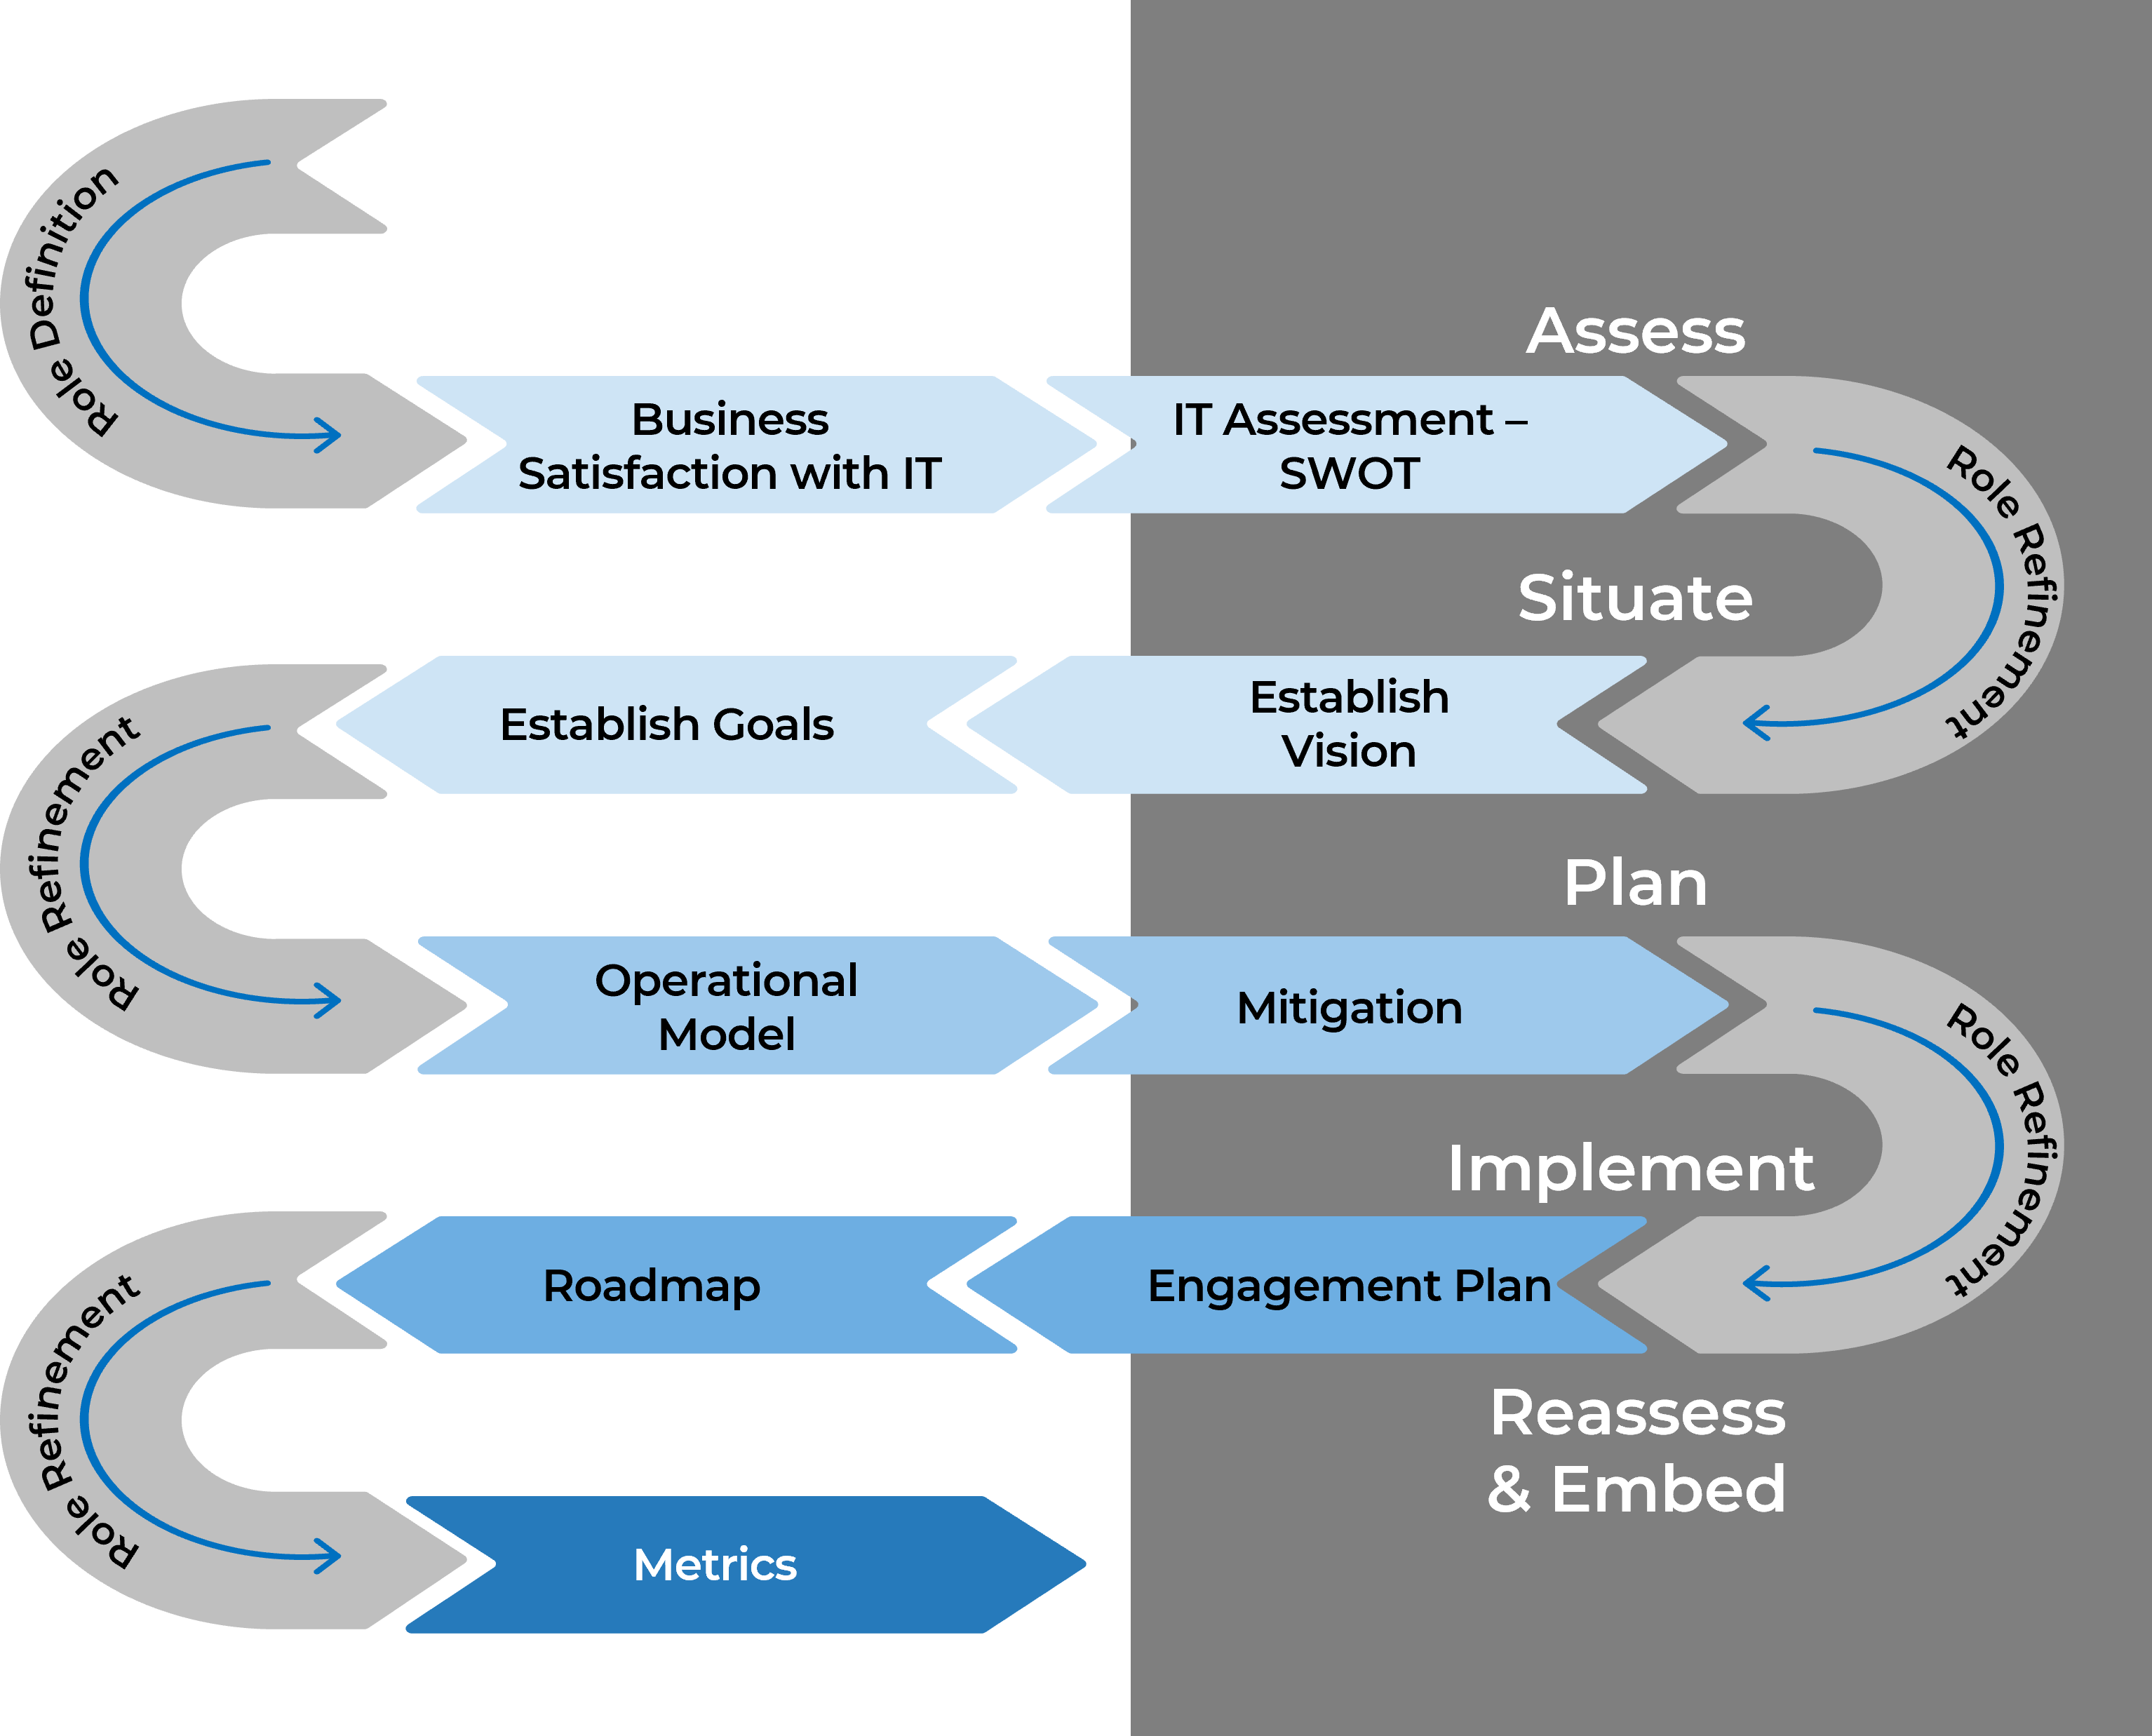 Info-Tech's ASPIRe method visualized as a winding path. It begins with 'Role Definition', goes through many 'Role Refinements' and ends with 'Metrics'. The main steps to which the acronym refers are 'Assess', 'Situate', 'Plan', 'Implement', and 'Reassess & Embed'.